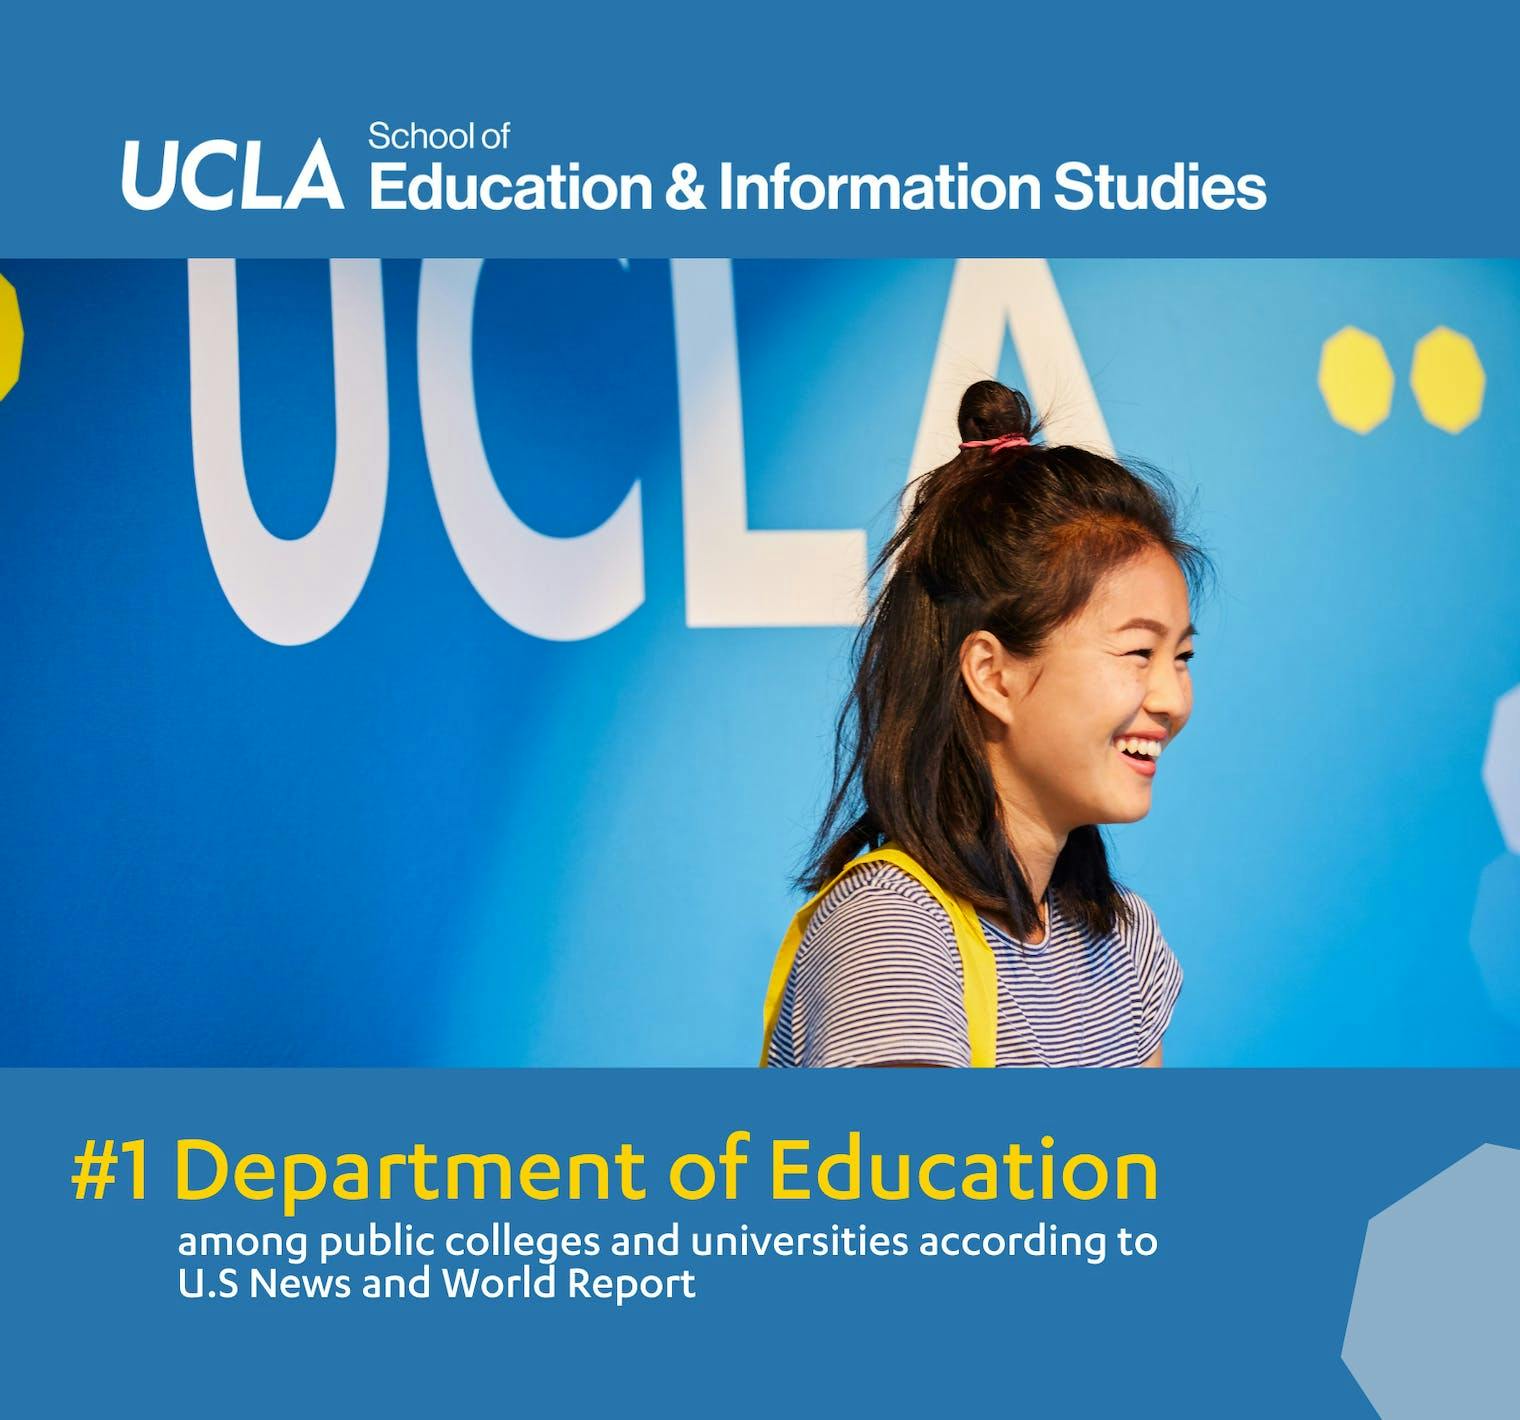 UCLA Department of Ed ranked #1 among public colleges and universities according to US News and World Report